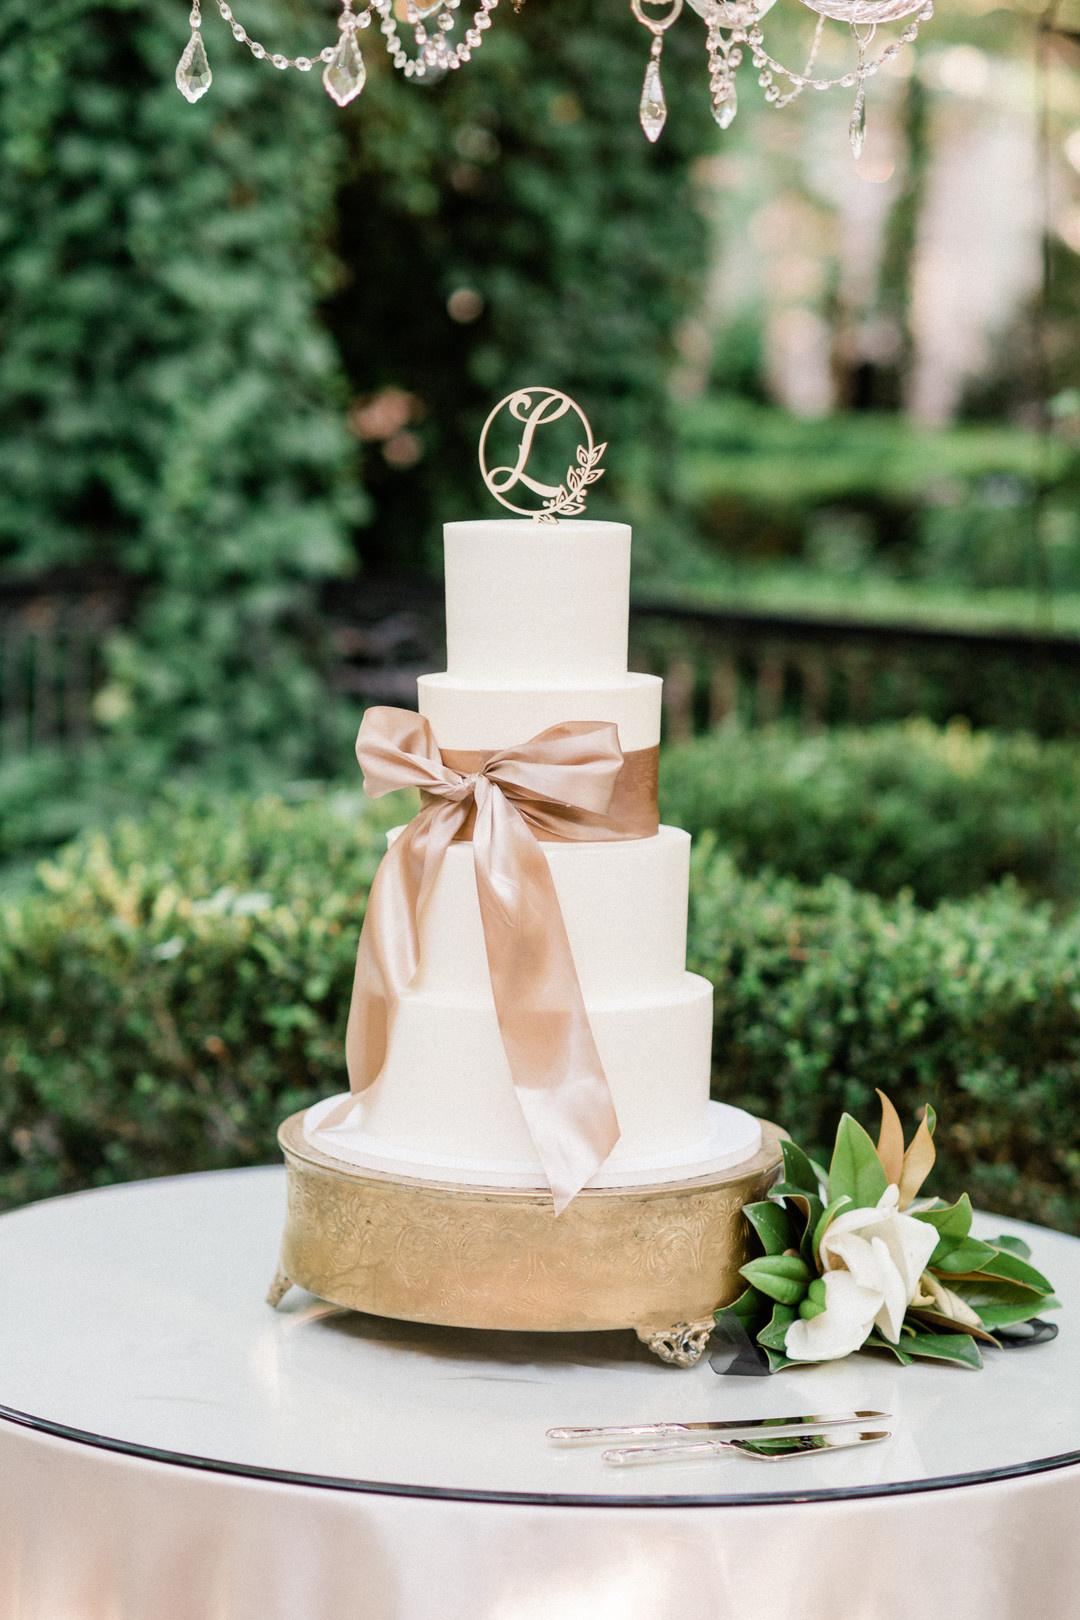 The Most Beautiful Wedding Cakes in Every Style